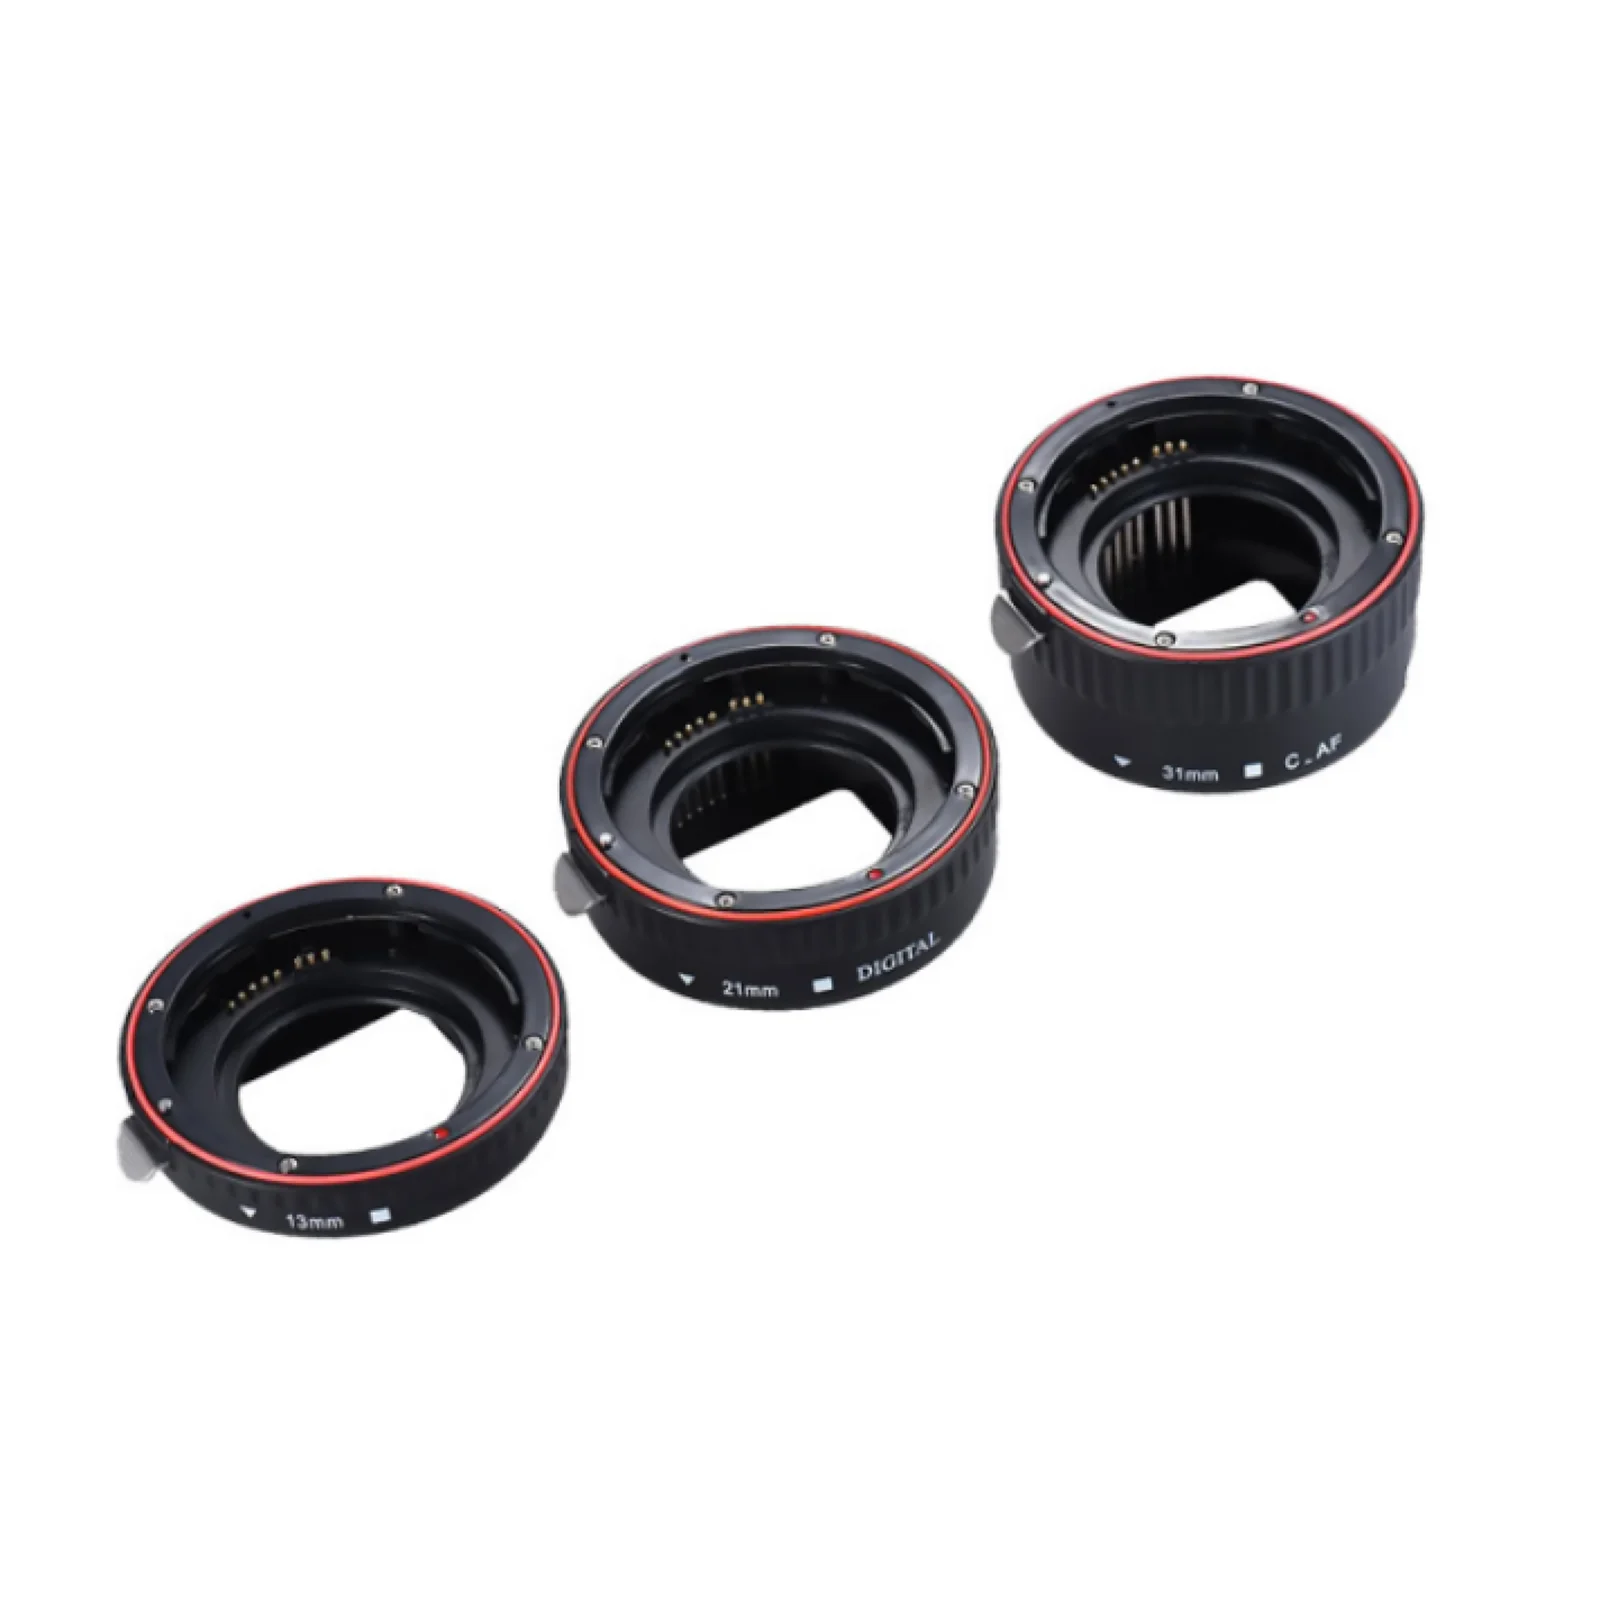 

Plastic Auto Focusing Macro Extension Lens Adapter Tube Rings Set 13 21 31mm Camera Lens For Canon EOS EF Mount Camera Accessory